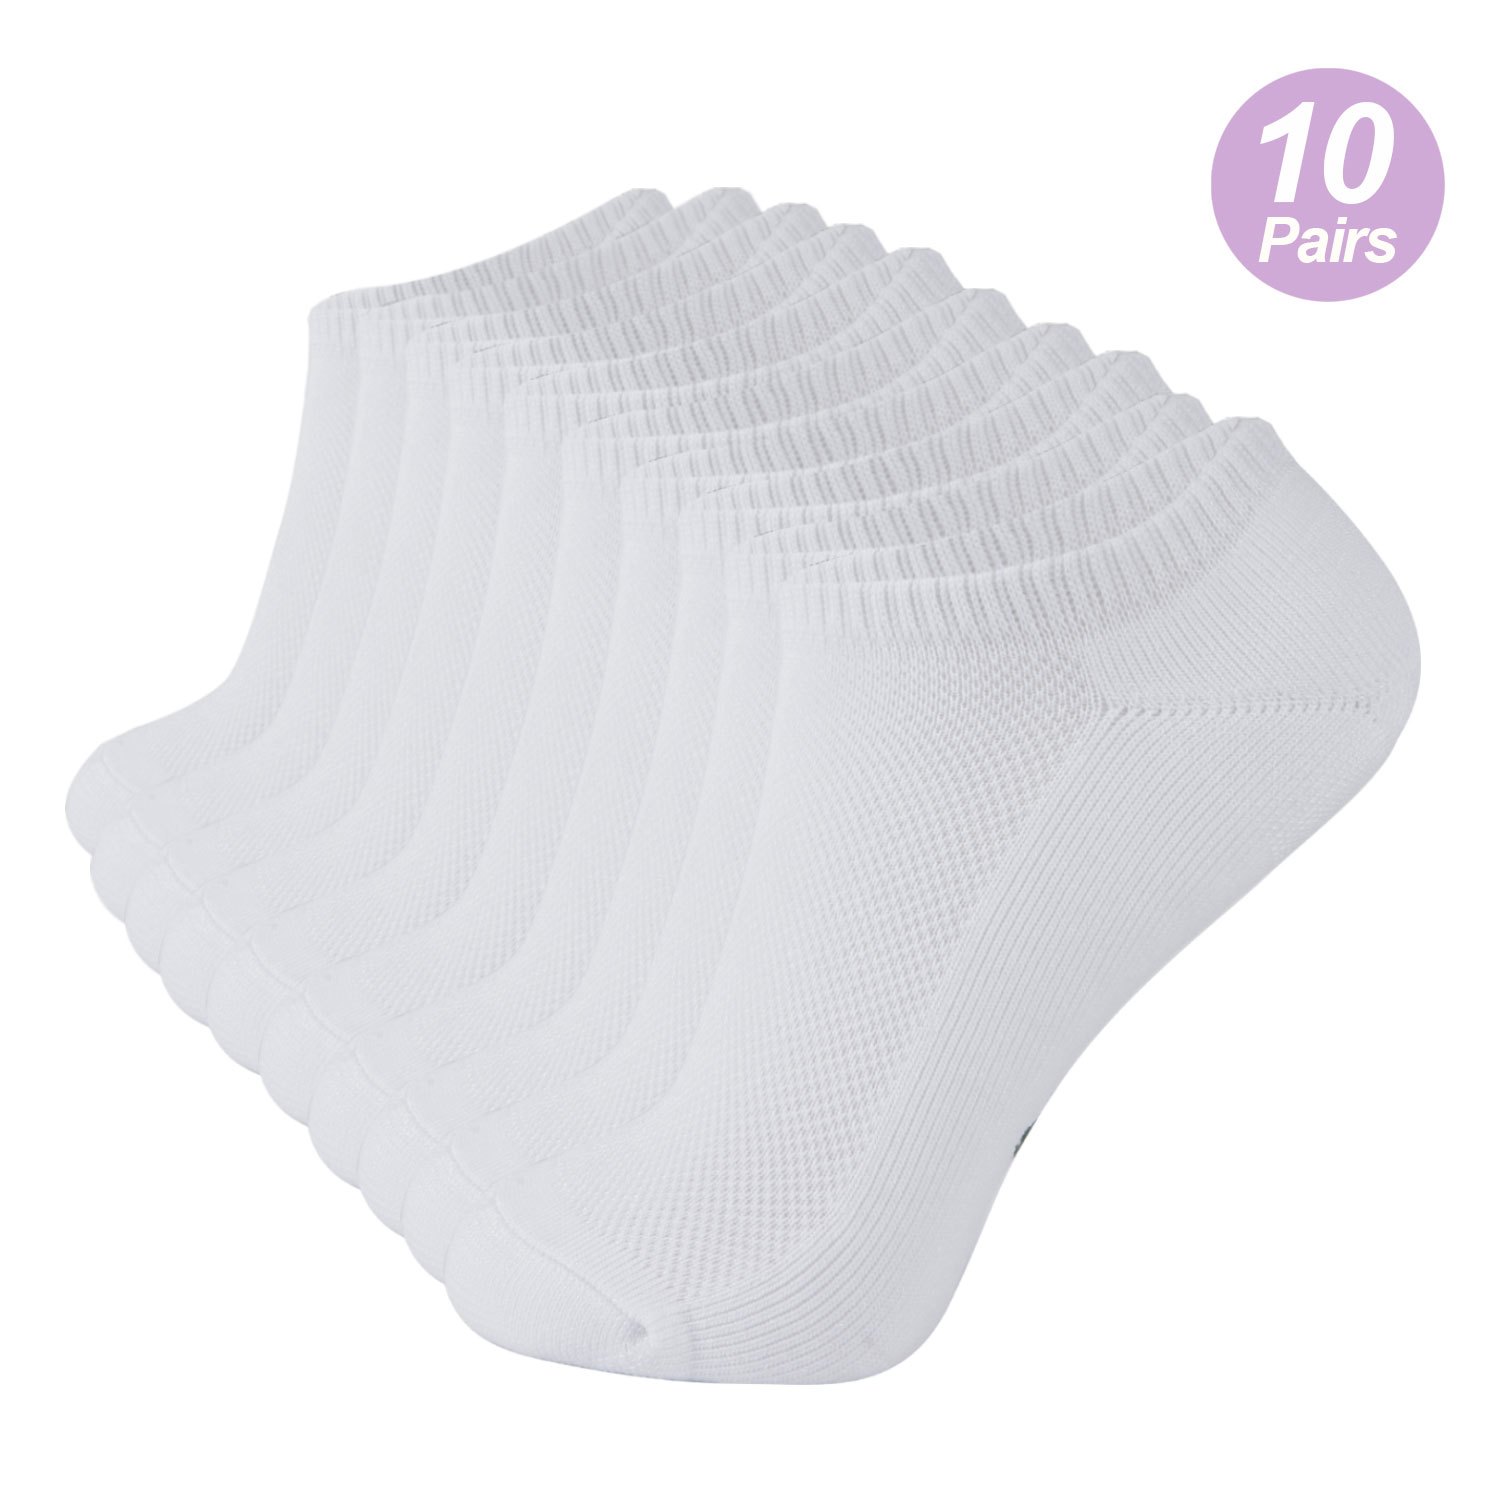 

10 Pairs Of Breathable, Comfy Womens Solid Colour Low Cut Socks - Elastic, Stretchy, And Moisture-wicking For Outdoor Activities And Casual Wear